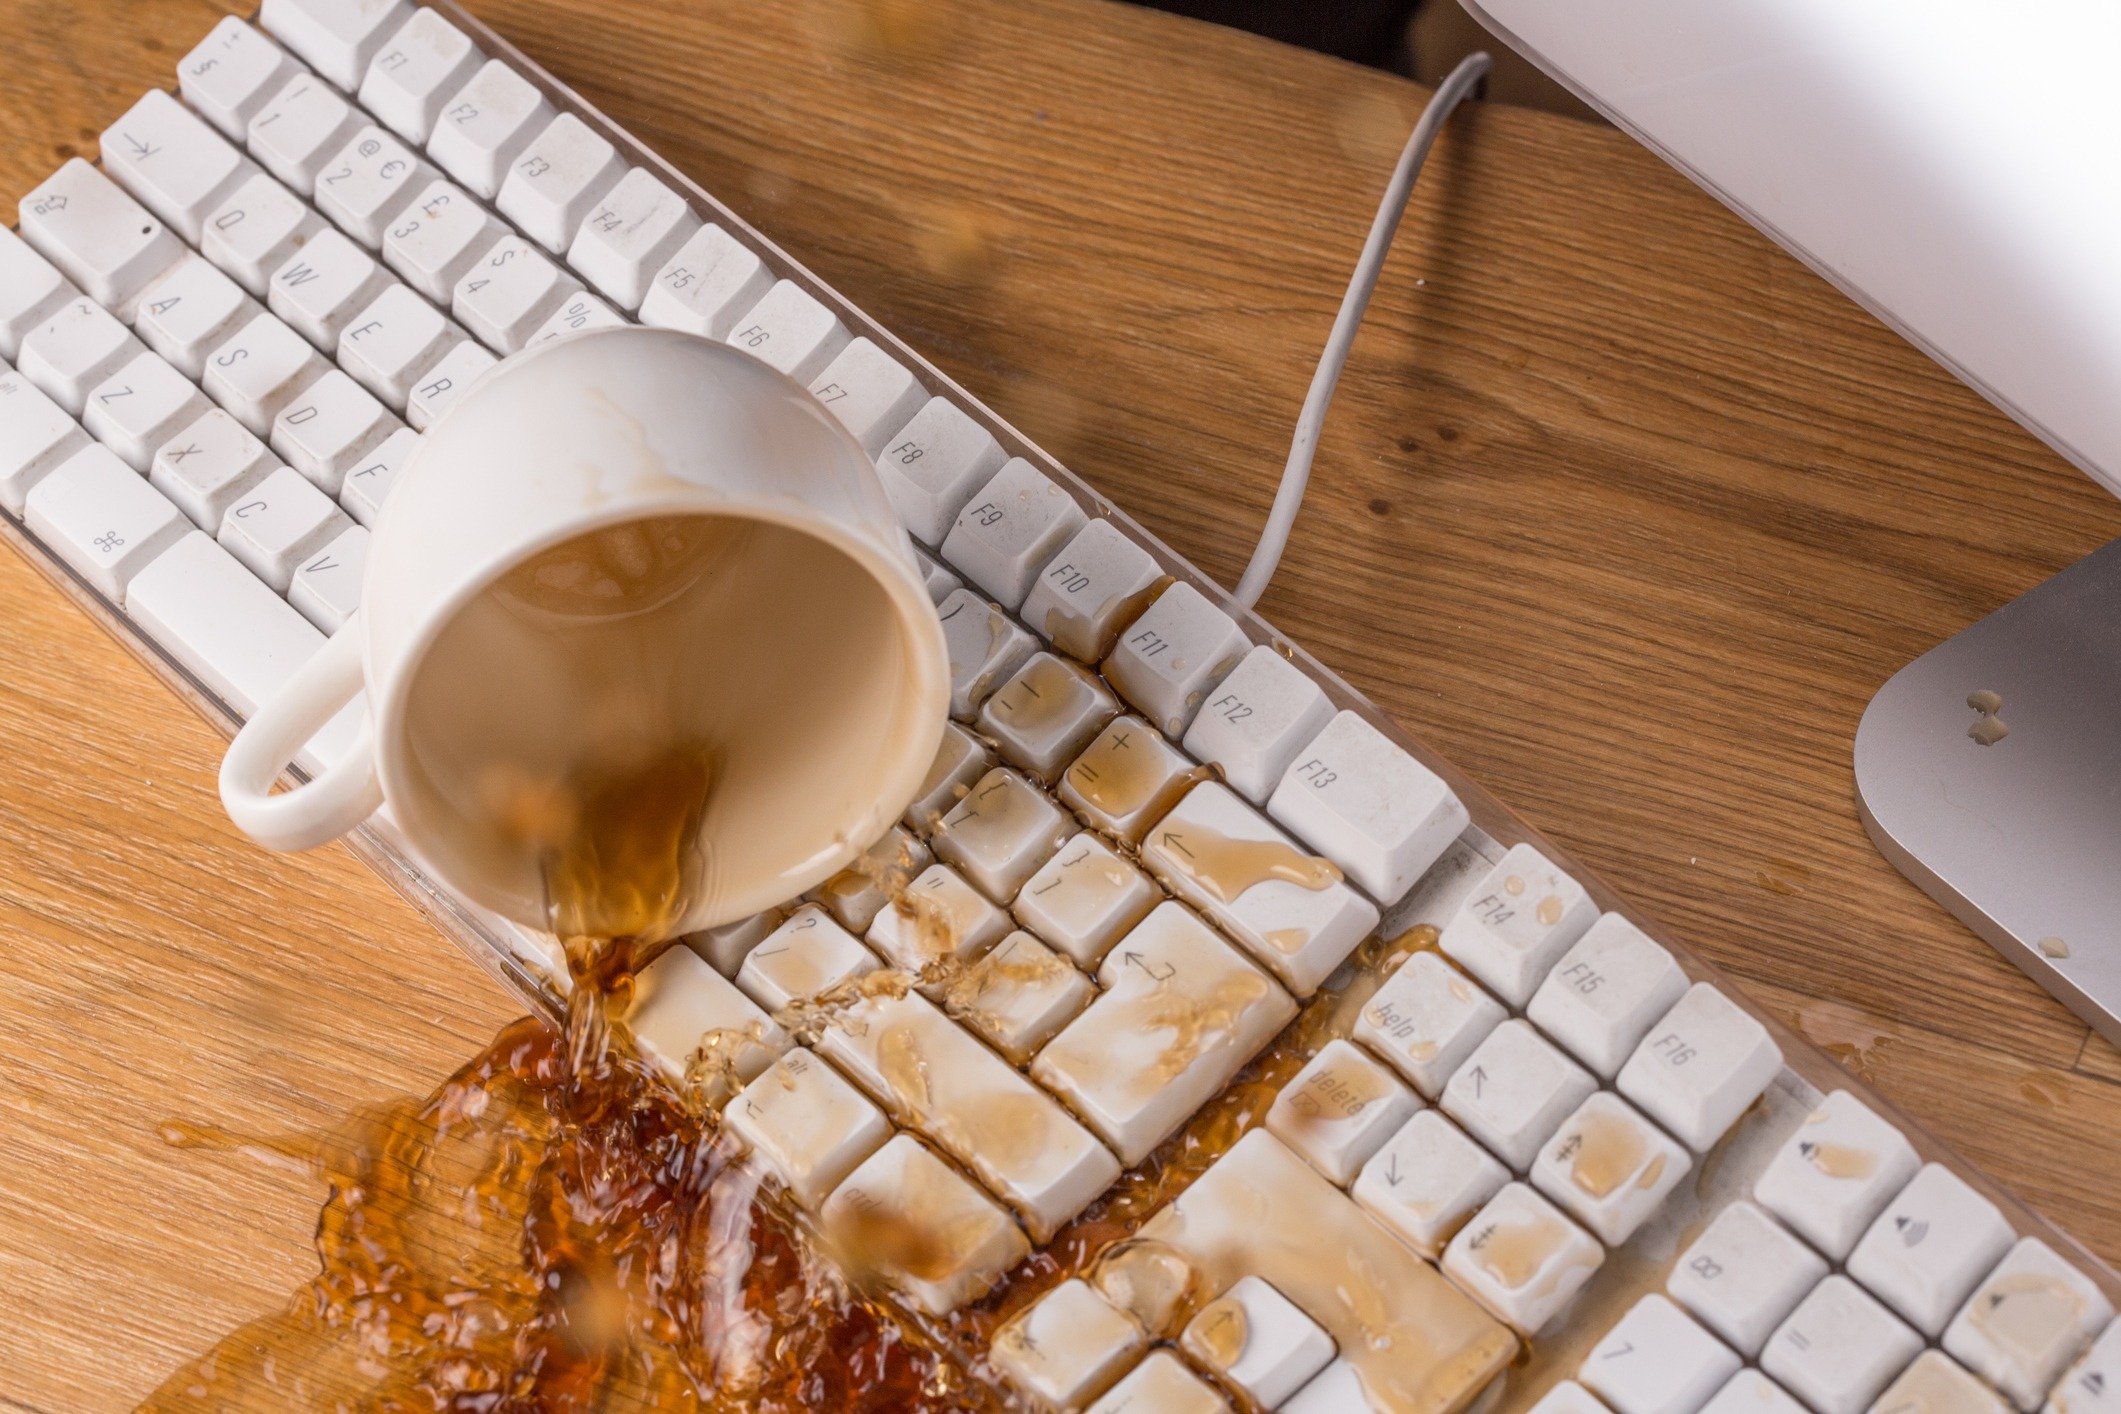 Cup of tea or coffee spilling over a keyboard